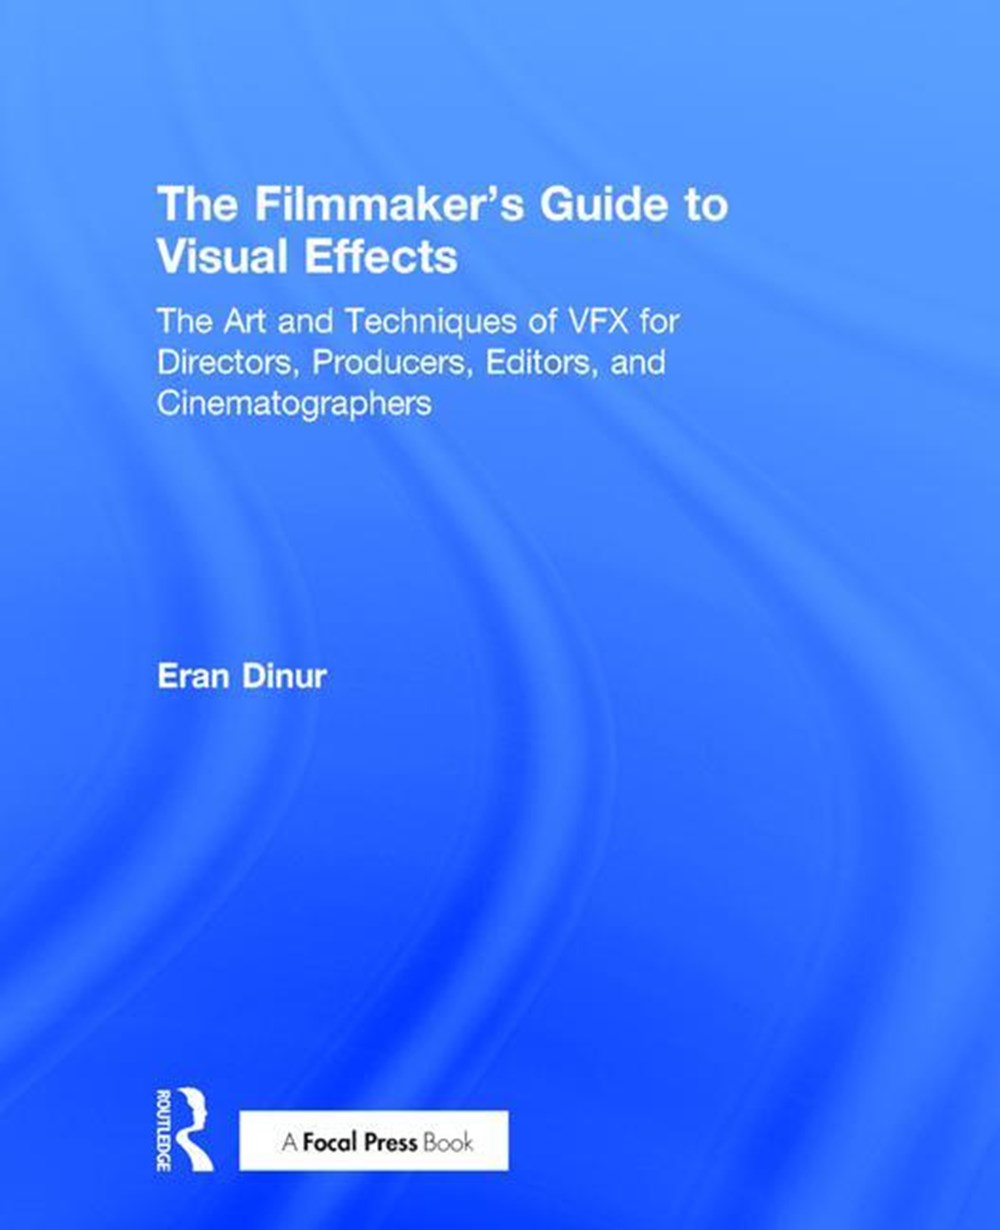 Filmmaker's Guide to Visual Effects: The Art and Techniques of Vfx for Directors, Producers, Editors